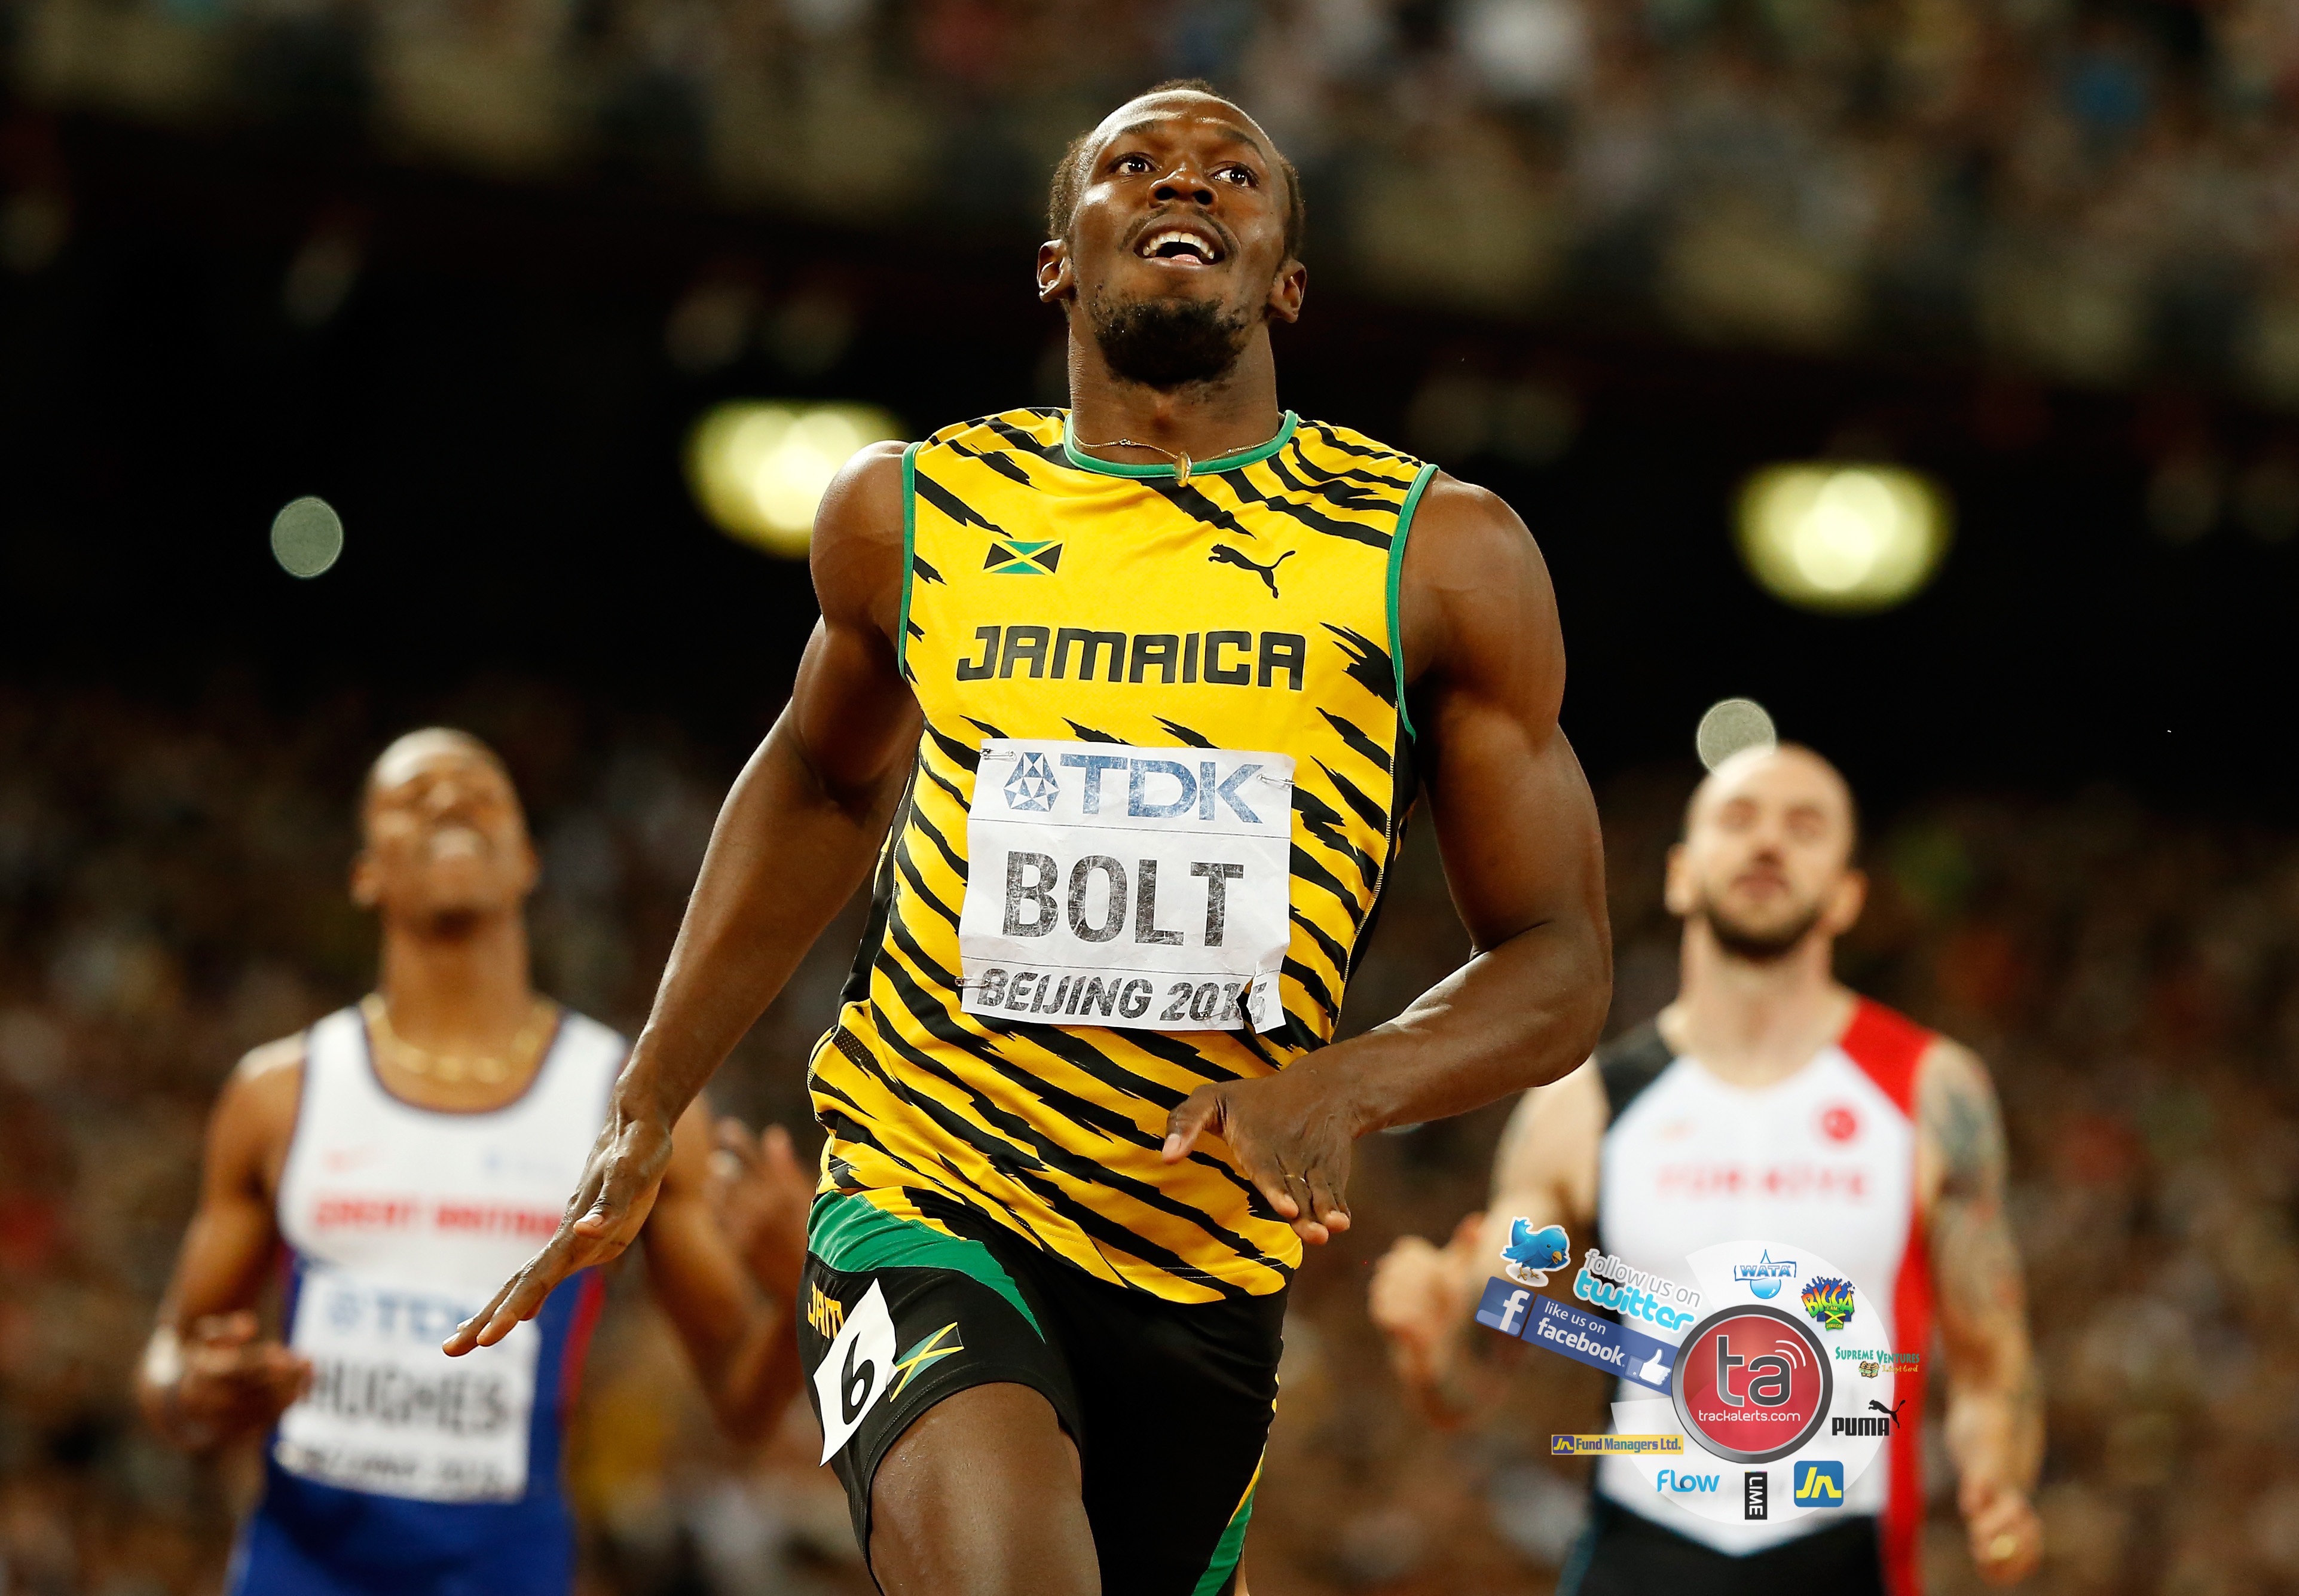 New Data Shows Shift in Athlete Media Coverage with Usain Bolt’s Decline